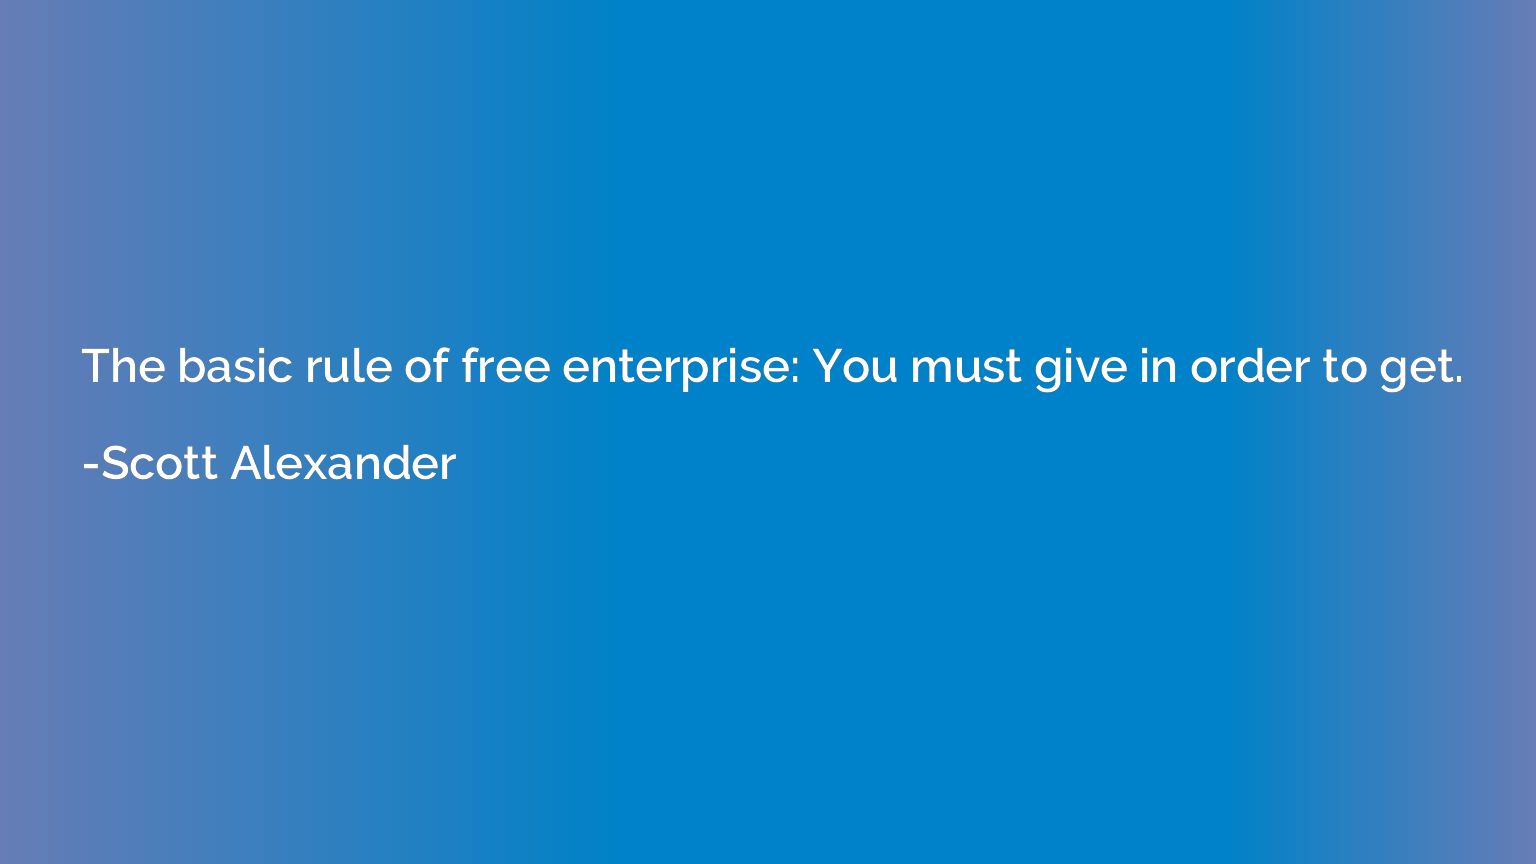 The basic rule of free enterprise: You must give in order to